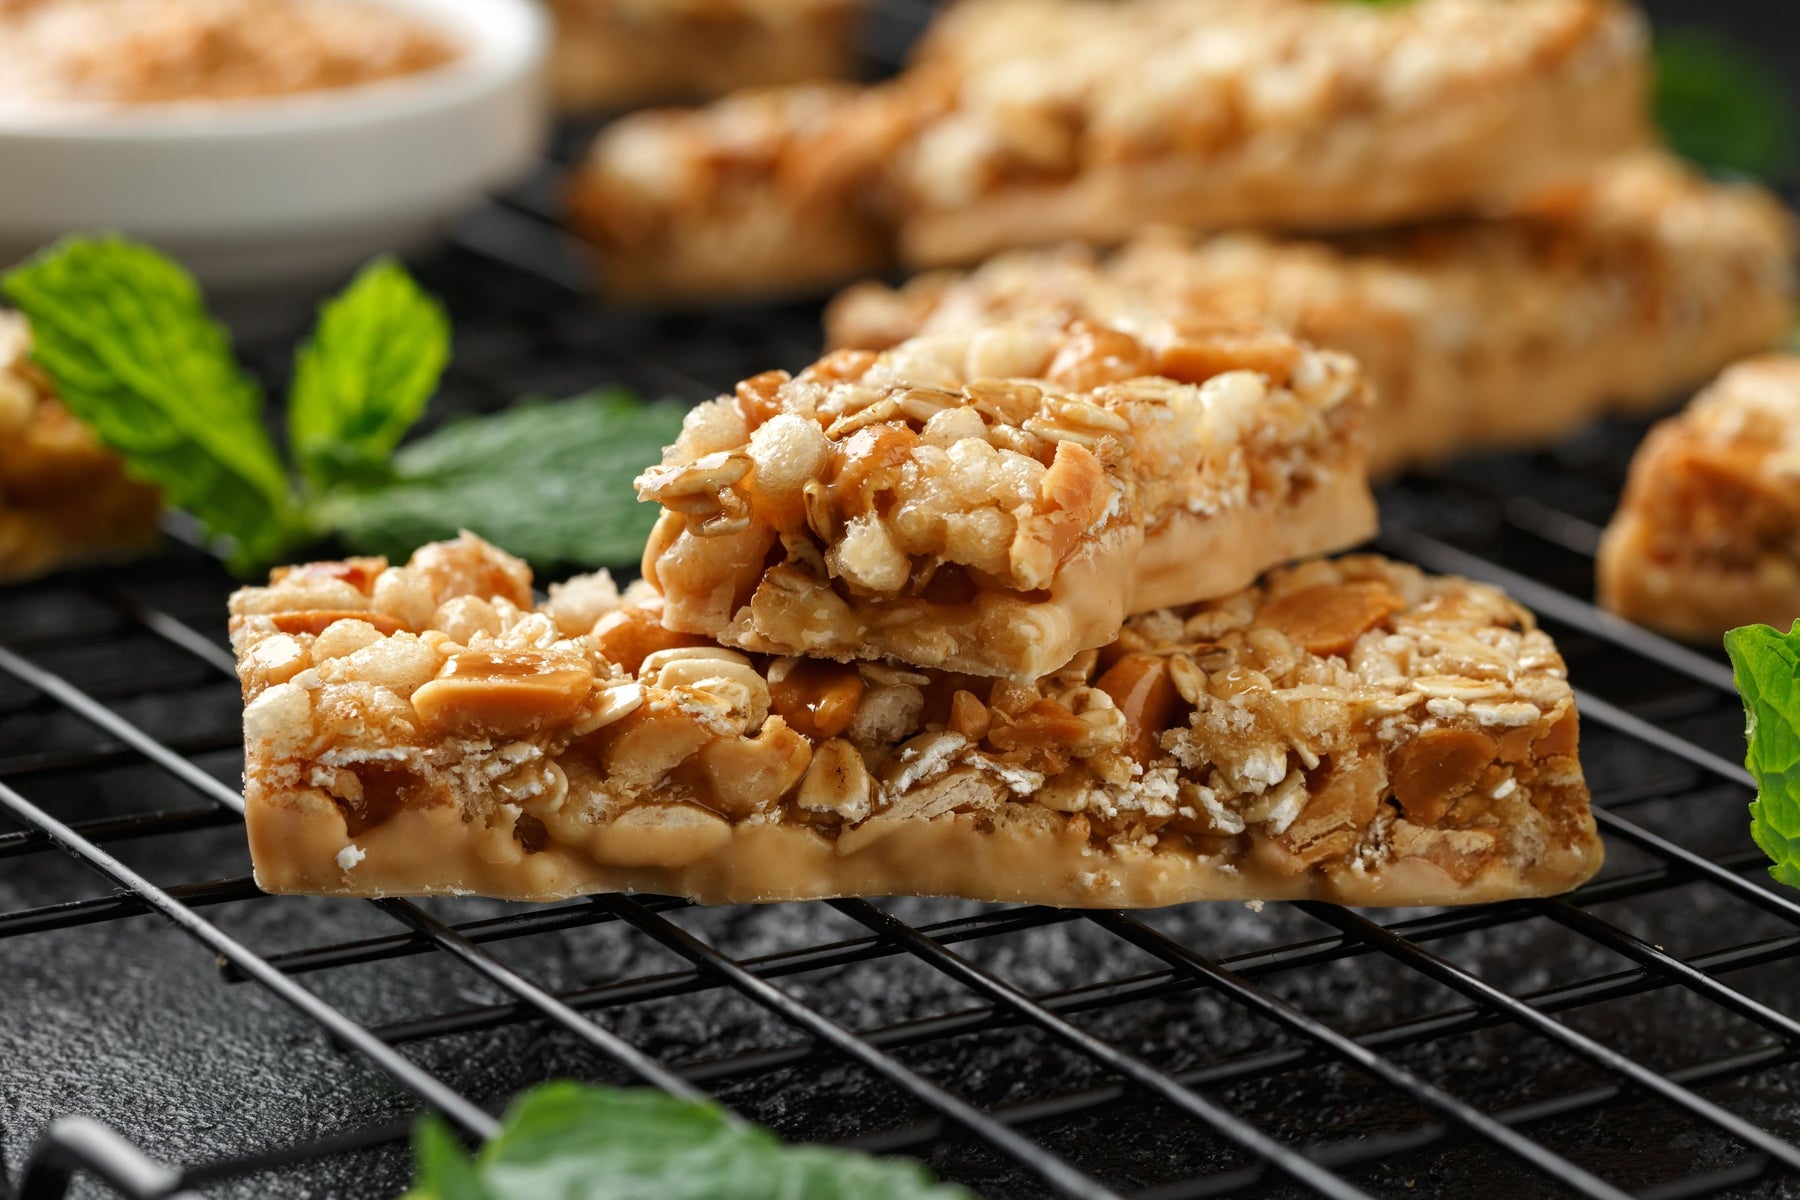 Organic Oat Bran Energy Bars: A Convenient and Healthy Snack on the Go